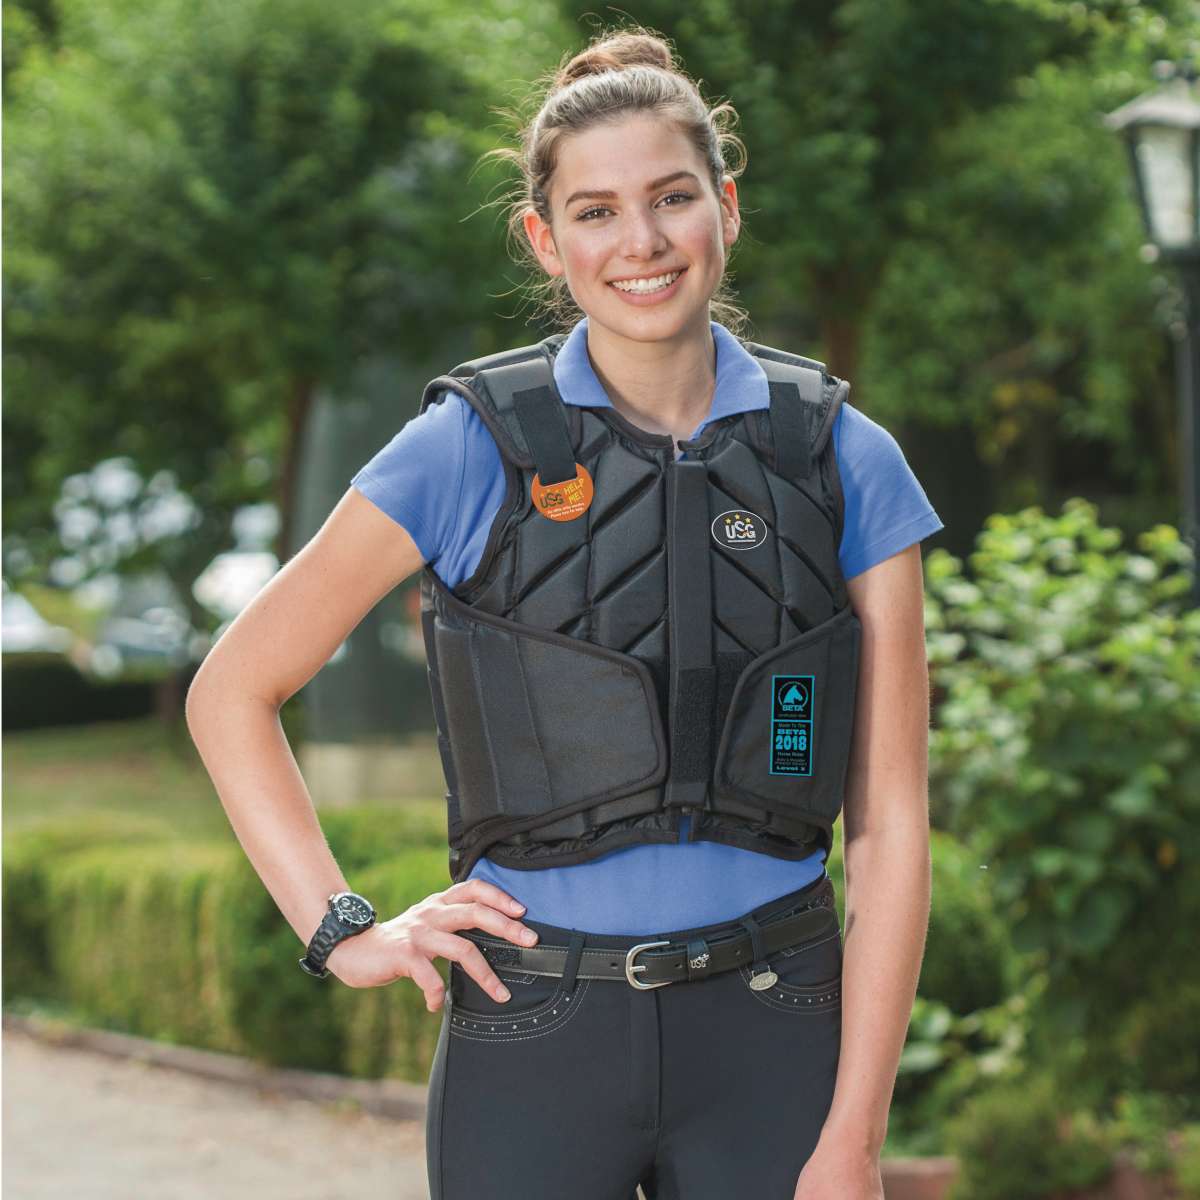 USG Eco-Flexi Adults Body Protector BETA 2018 Level 3 - Top Of The Clops